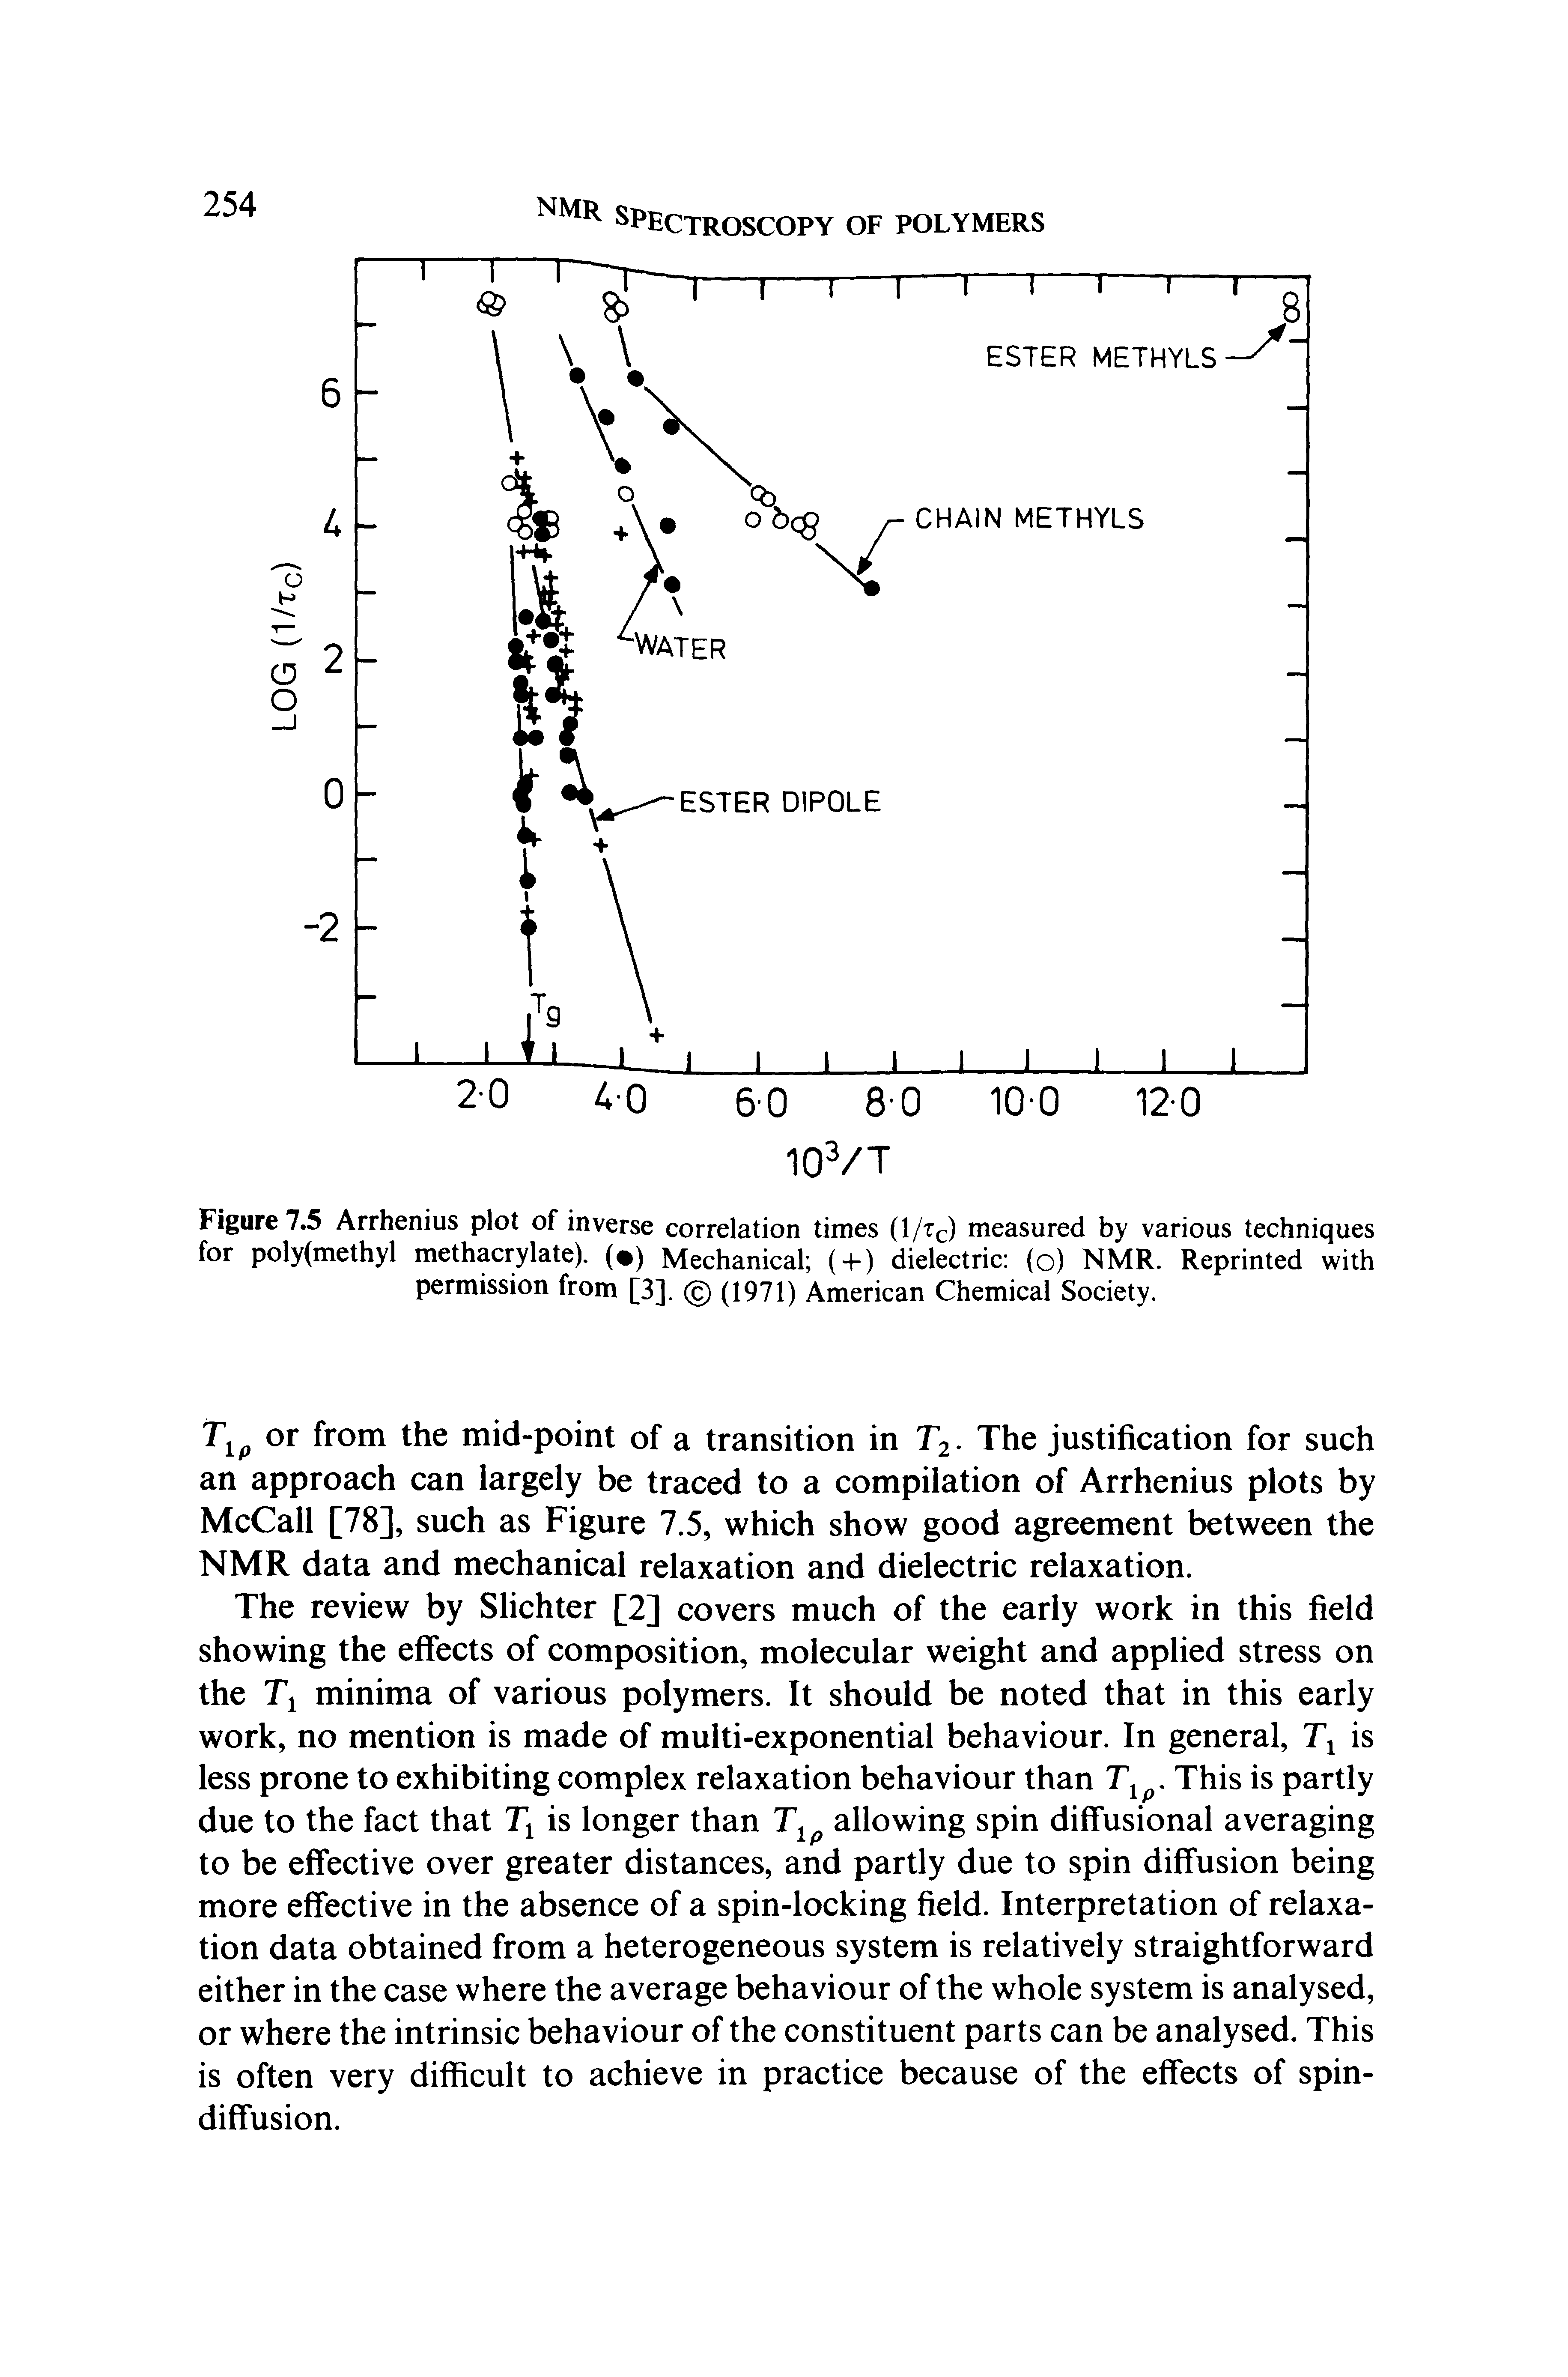 Figure 7.5 Arrhenius plot of inverse correlation times (1/tc) measured by various techniques for poly(methyl methacrylate). ( ) Mechanical ( + ) dielectric (o) NMR. Reprinted with permission from [3]. (c) (1971) American Chemical Society.